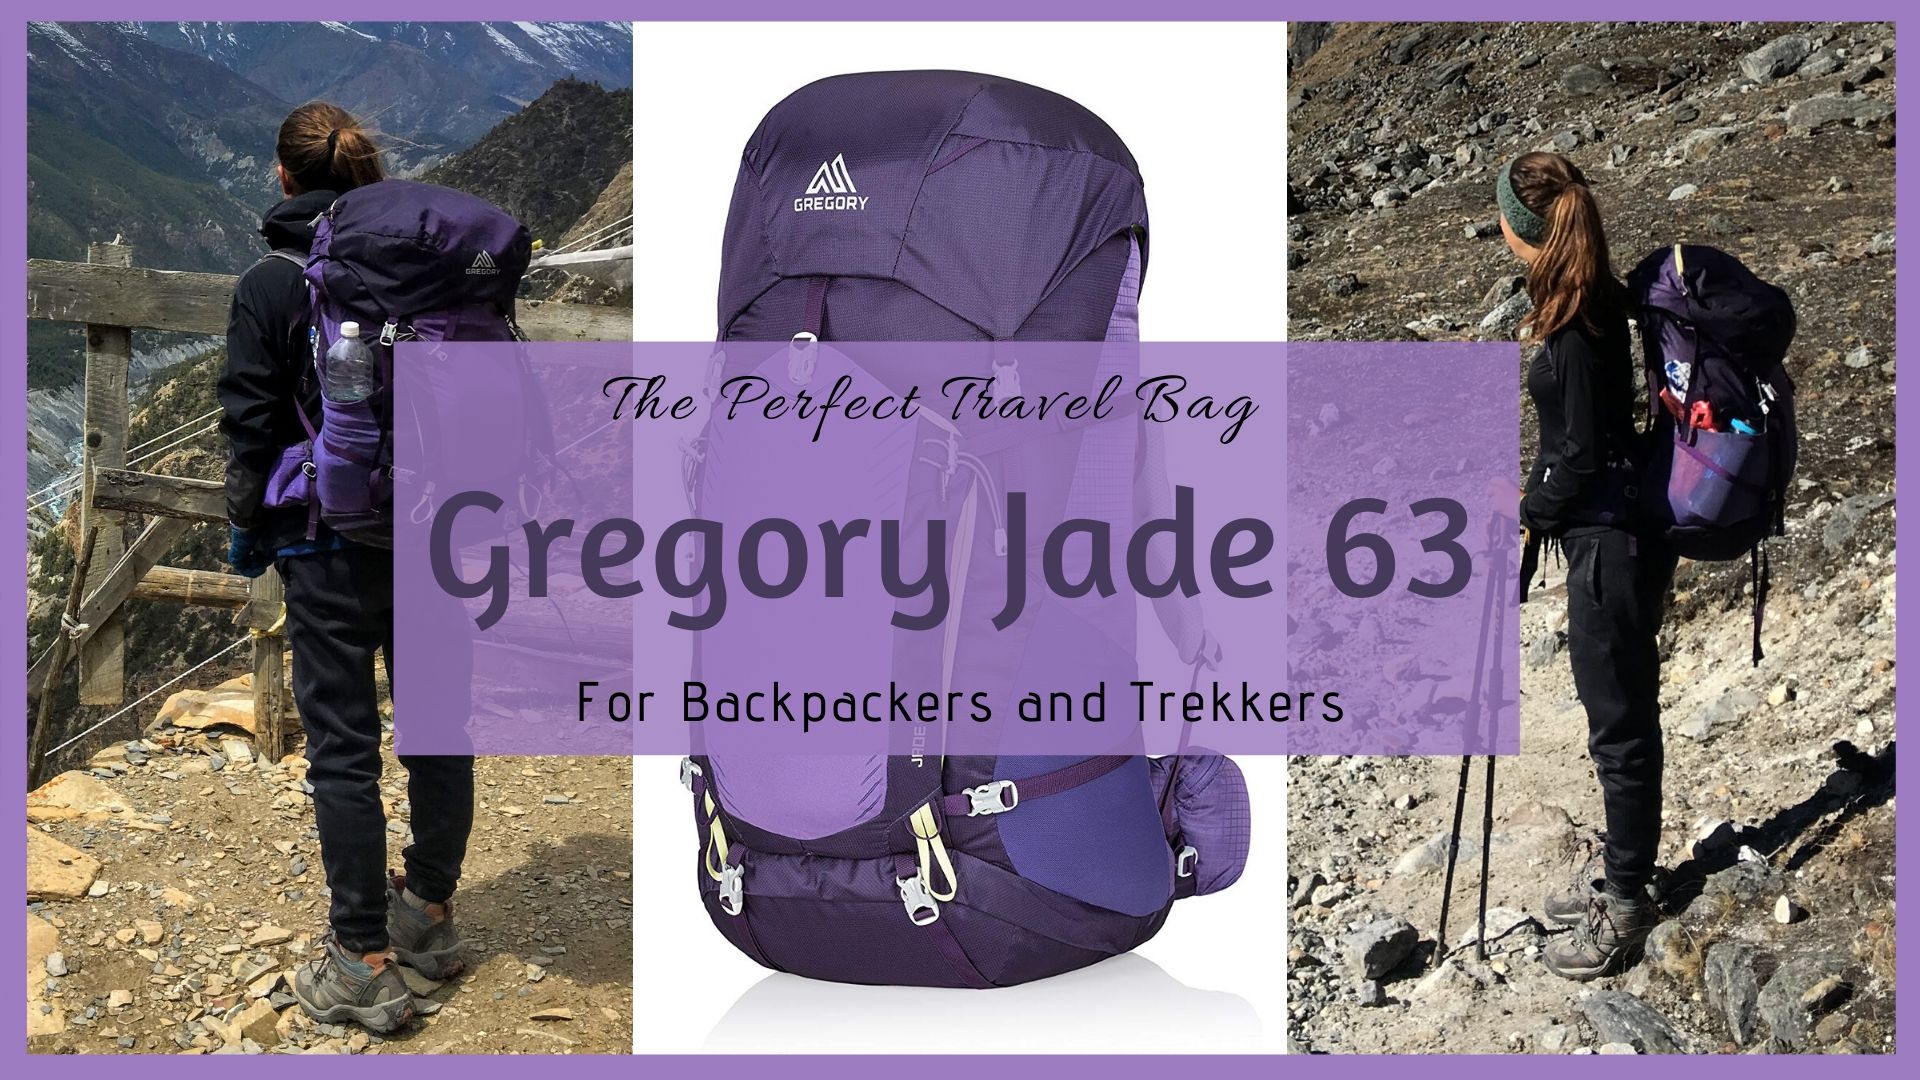 Gregory Jade 63 Review – The Best Bag for Backpackers!